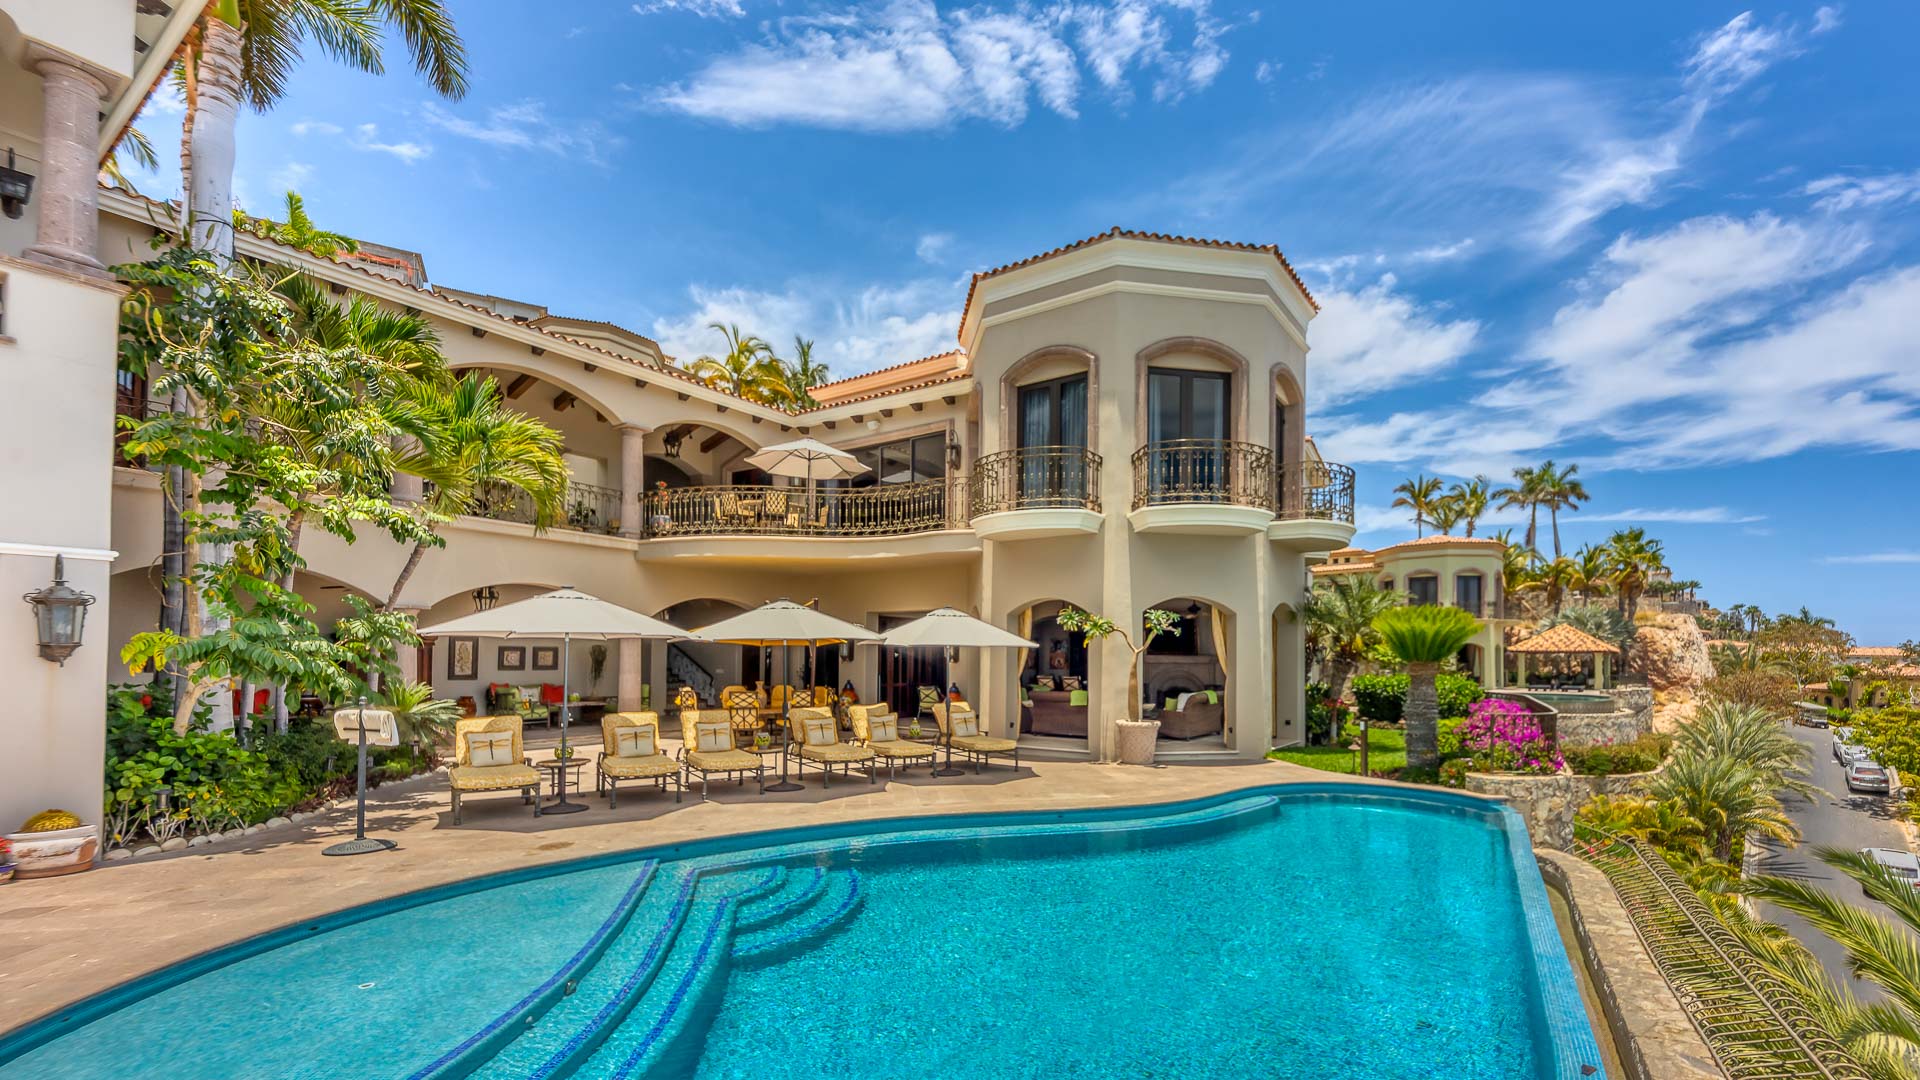 Property Image 2 - Cabo Villa with Mediterranean Style and Palatial Charm